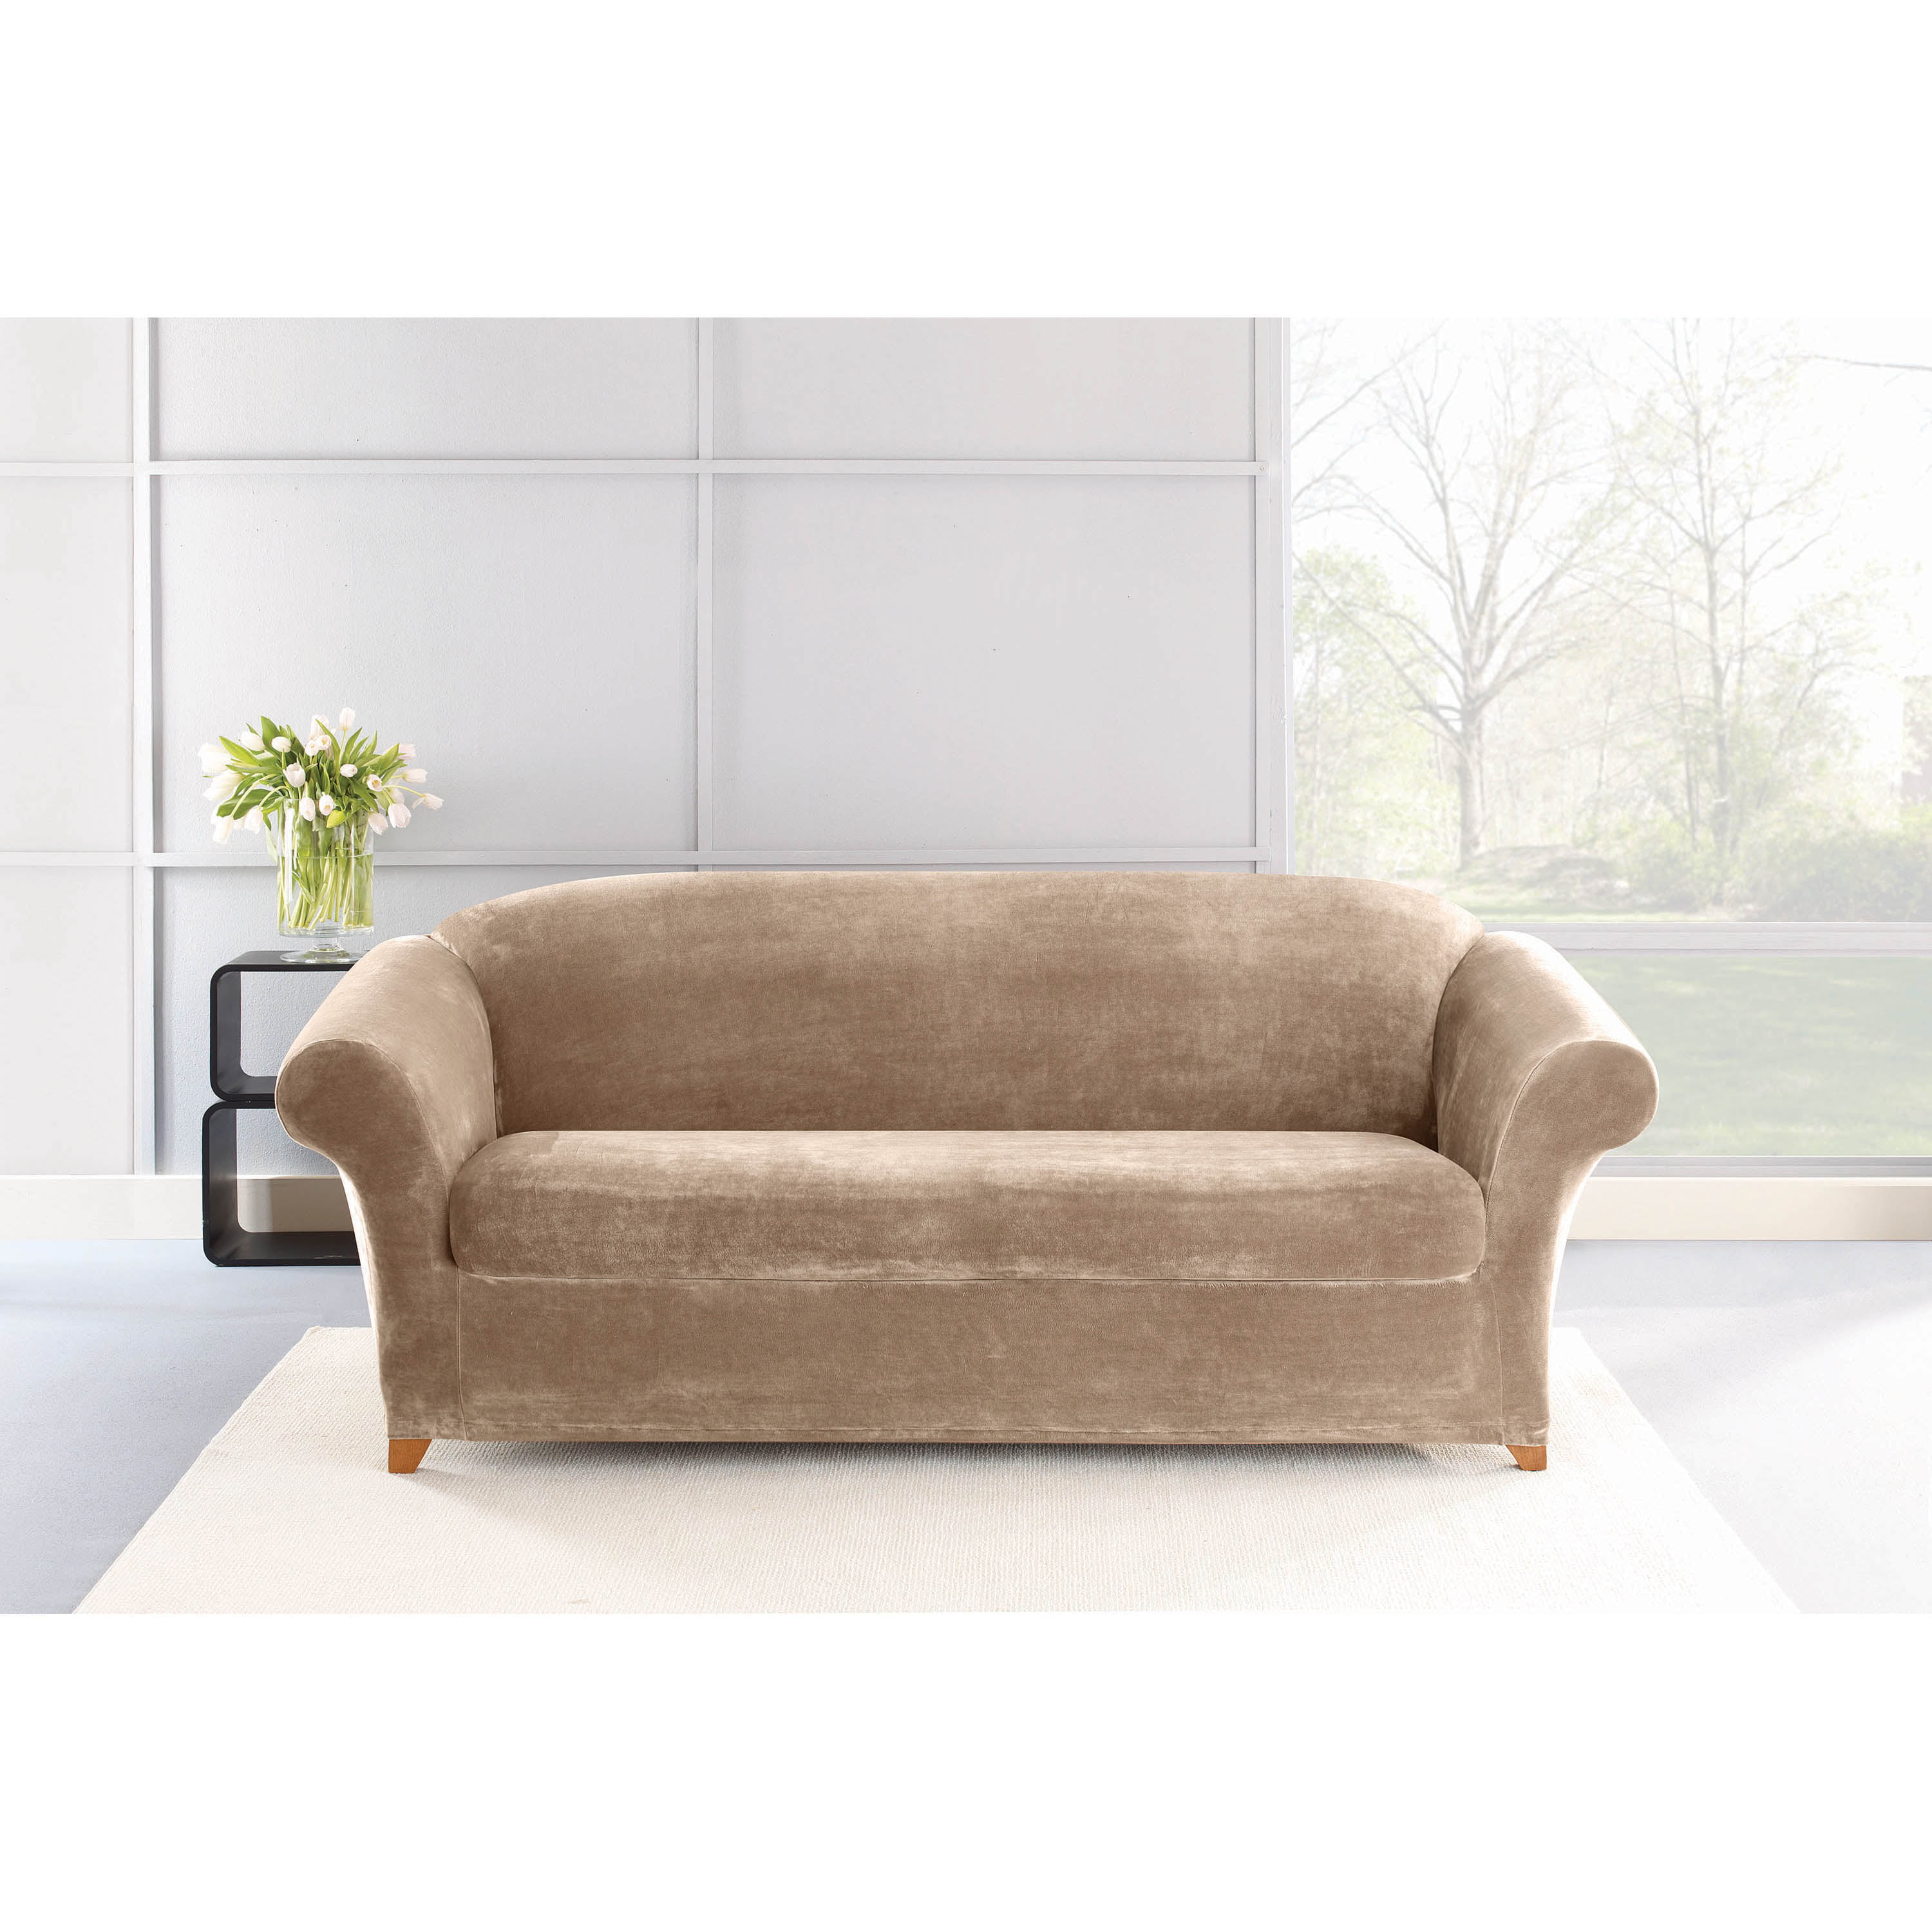 Sure Fit Stretch Plush slipcover sable tan 2 piece box cushion Chair Slipcover 